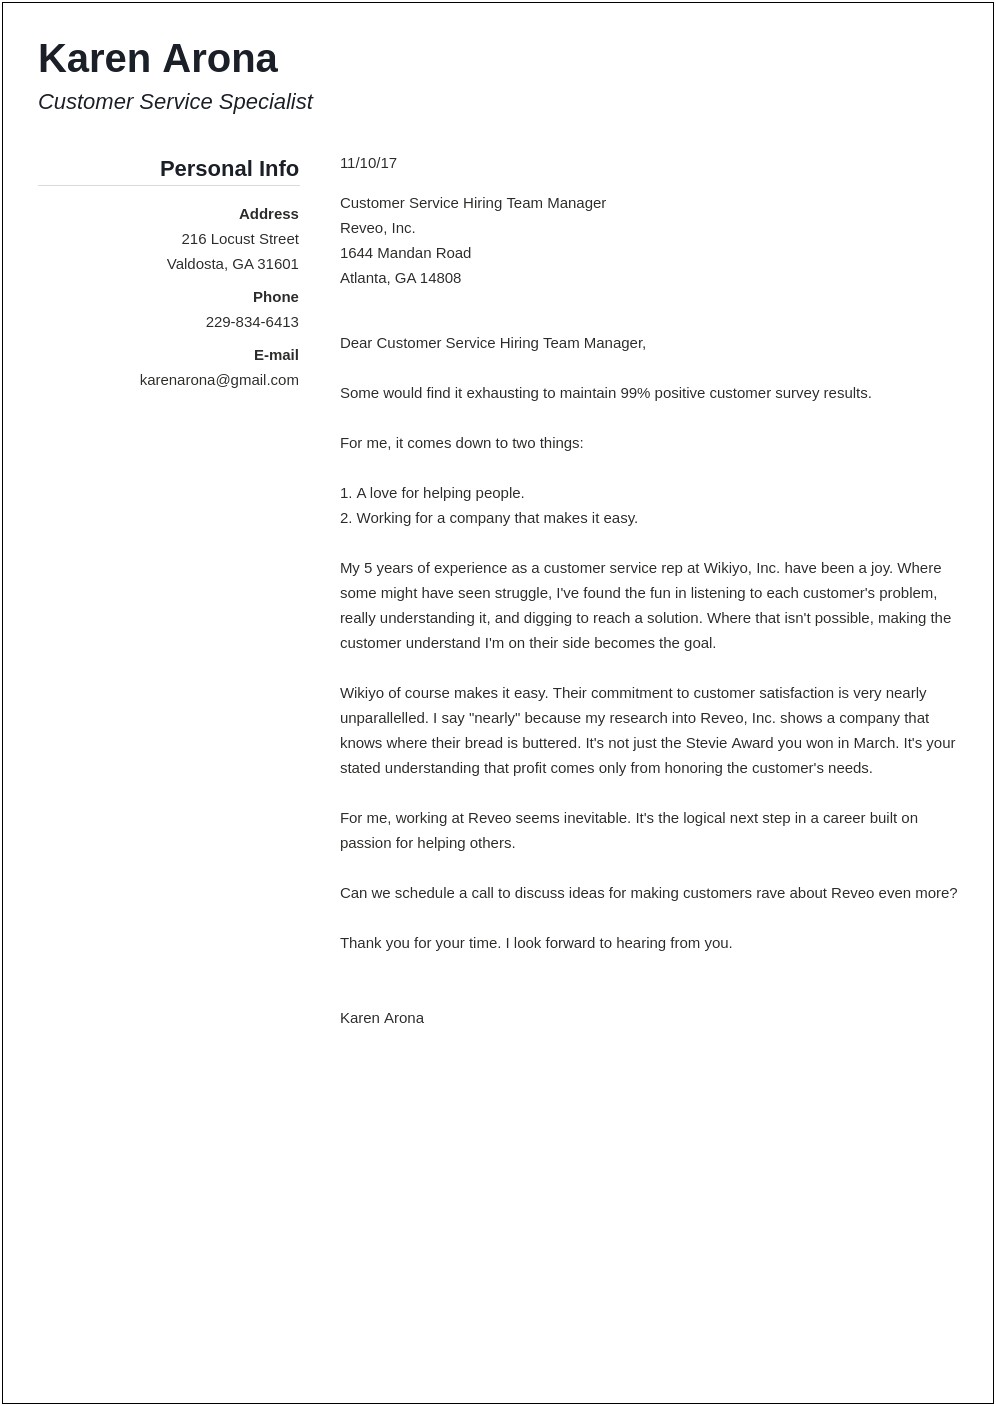 Resume Cover Letter Without Contact Name